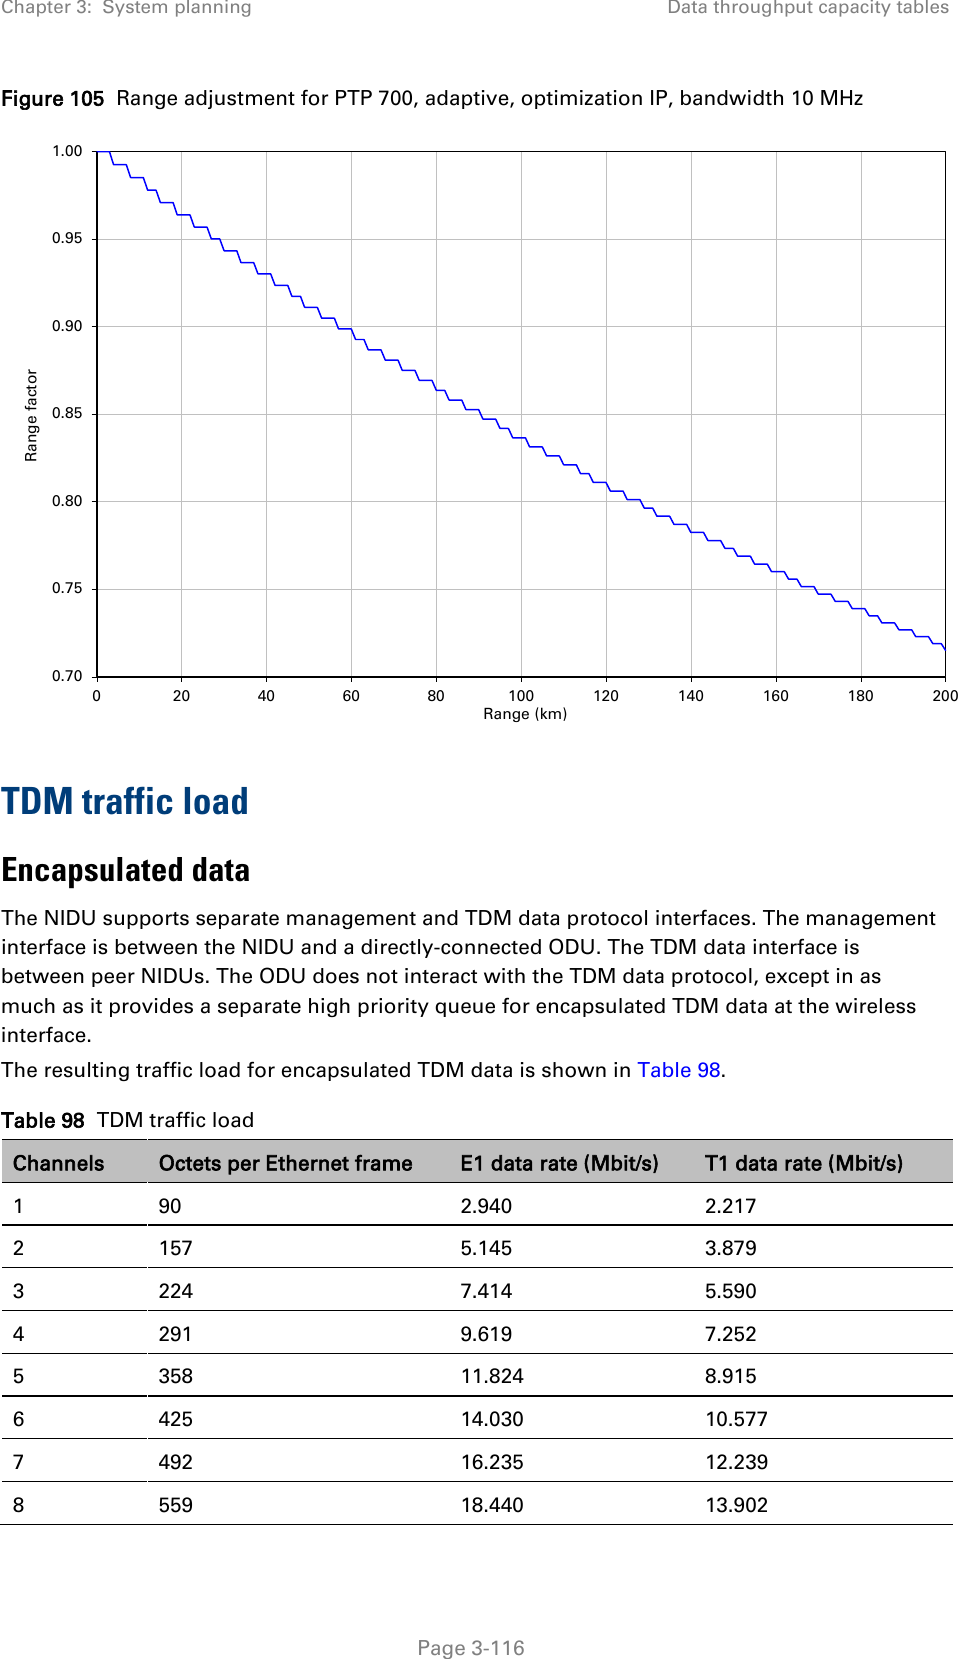 Chapter 3:  System planning Data throughput capacity tables  Figure 105  Range adjustment for PTP 700, adaptive, optimization IP, bandwidth 10 MHz  TDM traffic load Encapsulated data The NIDU supports separate management and TDM data protocol interfaces. The management interface is between the NIDU and a directly-connected ODU. The TDM data interface is between peer NIDUs. The ODU does not interact with the TDM data protocol, except in as much as it provides a separate high priority queue for encapsulated TDM data at the wireless interface. The resulting traffic load for encapsulated TDM data is shown in Table 98. Table 98  TDM traffic load Channels Octets per Ethernet frame E1 data rate (Mbit/s) T1 data rate (Mbit/s) 1  90 2.940 2.217 2  157 5.145 3.879 3  224 7.414 5.590 4  291 9.619 7.252 5  358 11.824 8.915 6  425 14.030 10.577 7  492 16.235 12.239 8  559 18.440 13.902 0.700.750.800.850.900.951.00020 40 60 80 100 120 140 160 180 200Range factorRange (km) Page 3-116 